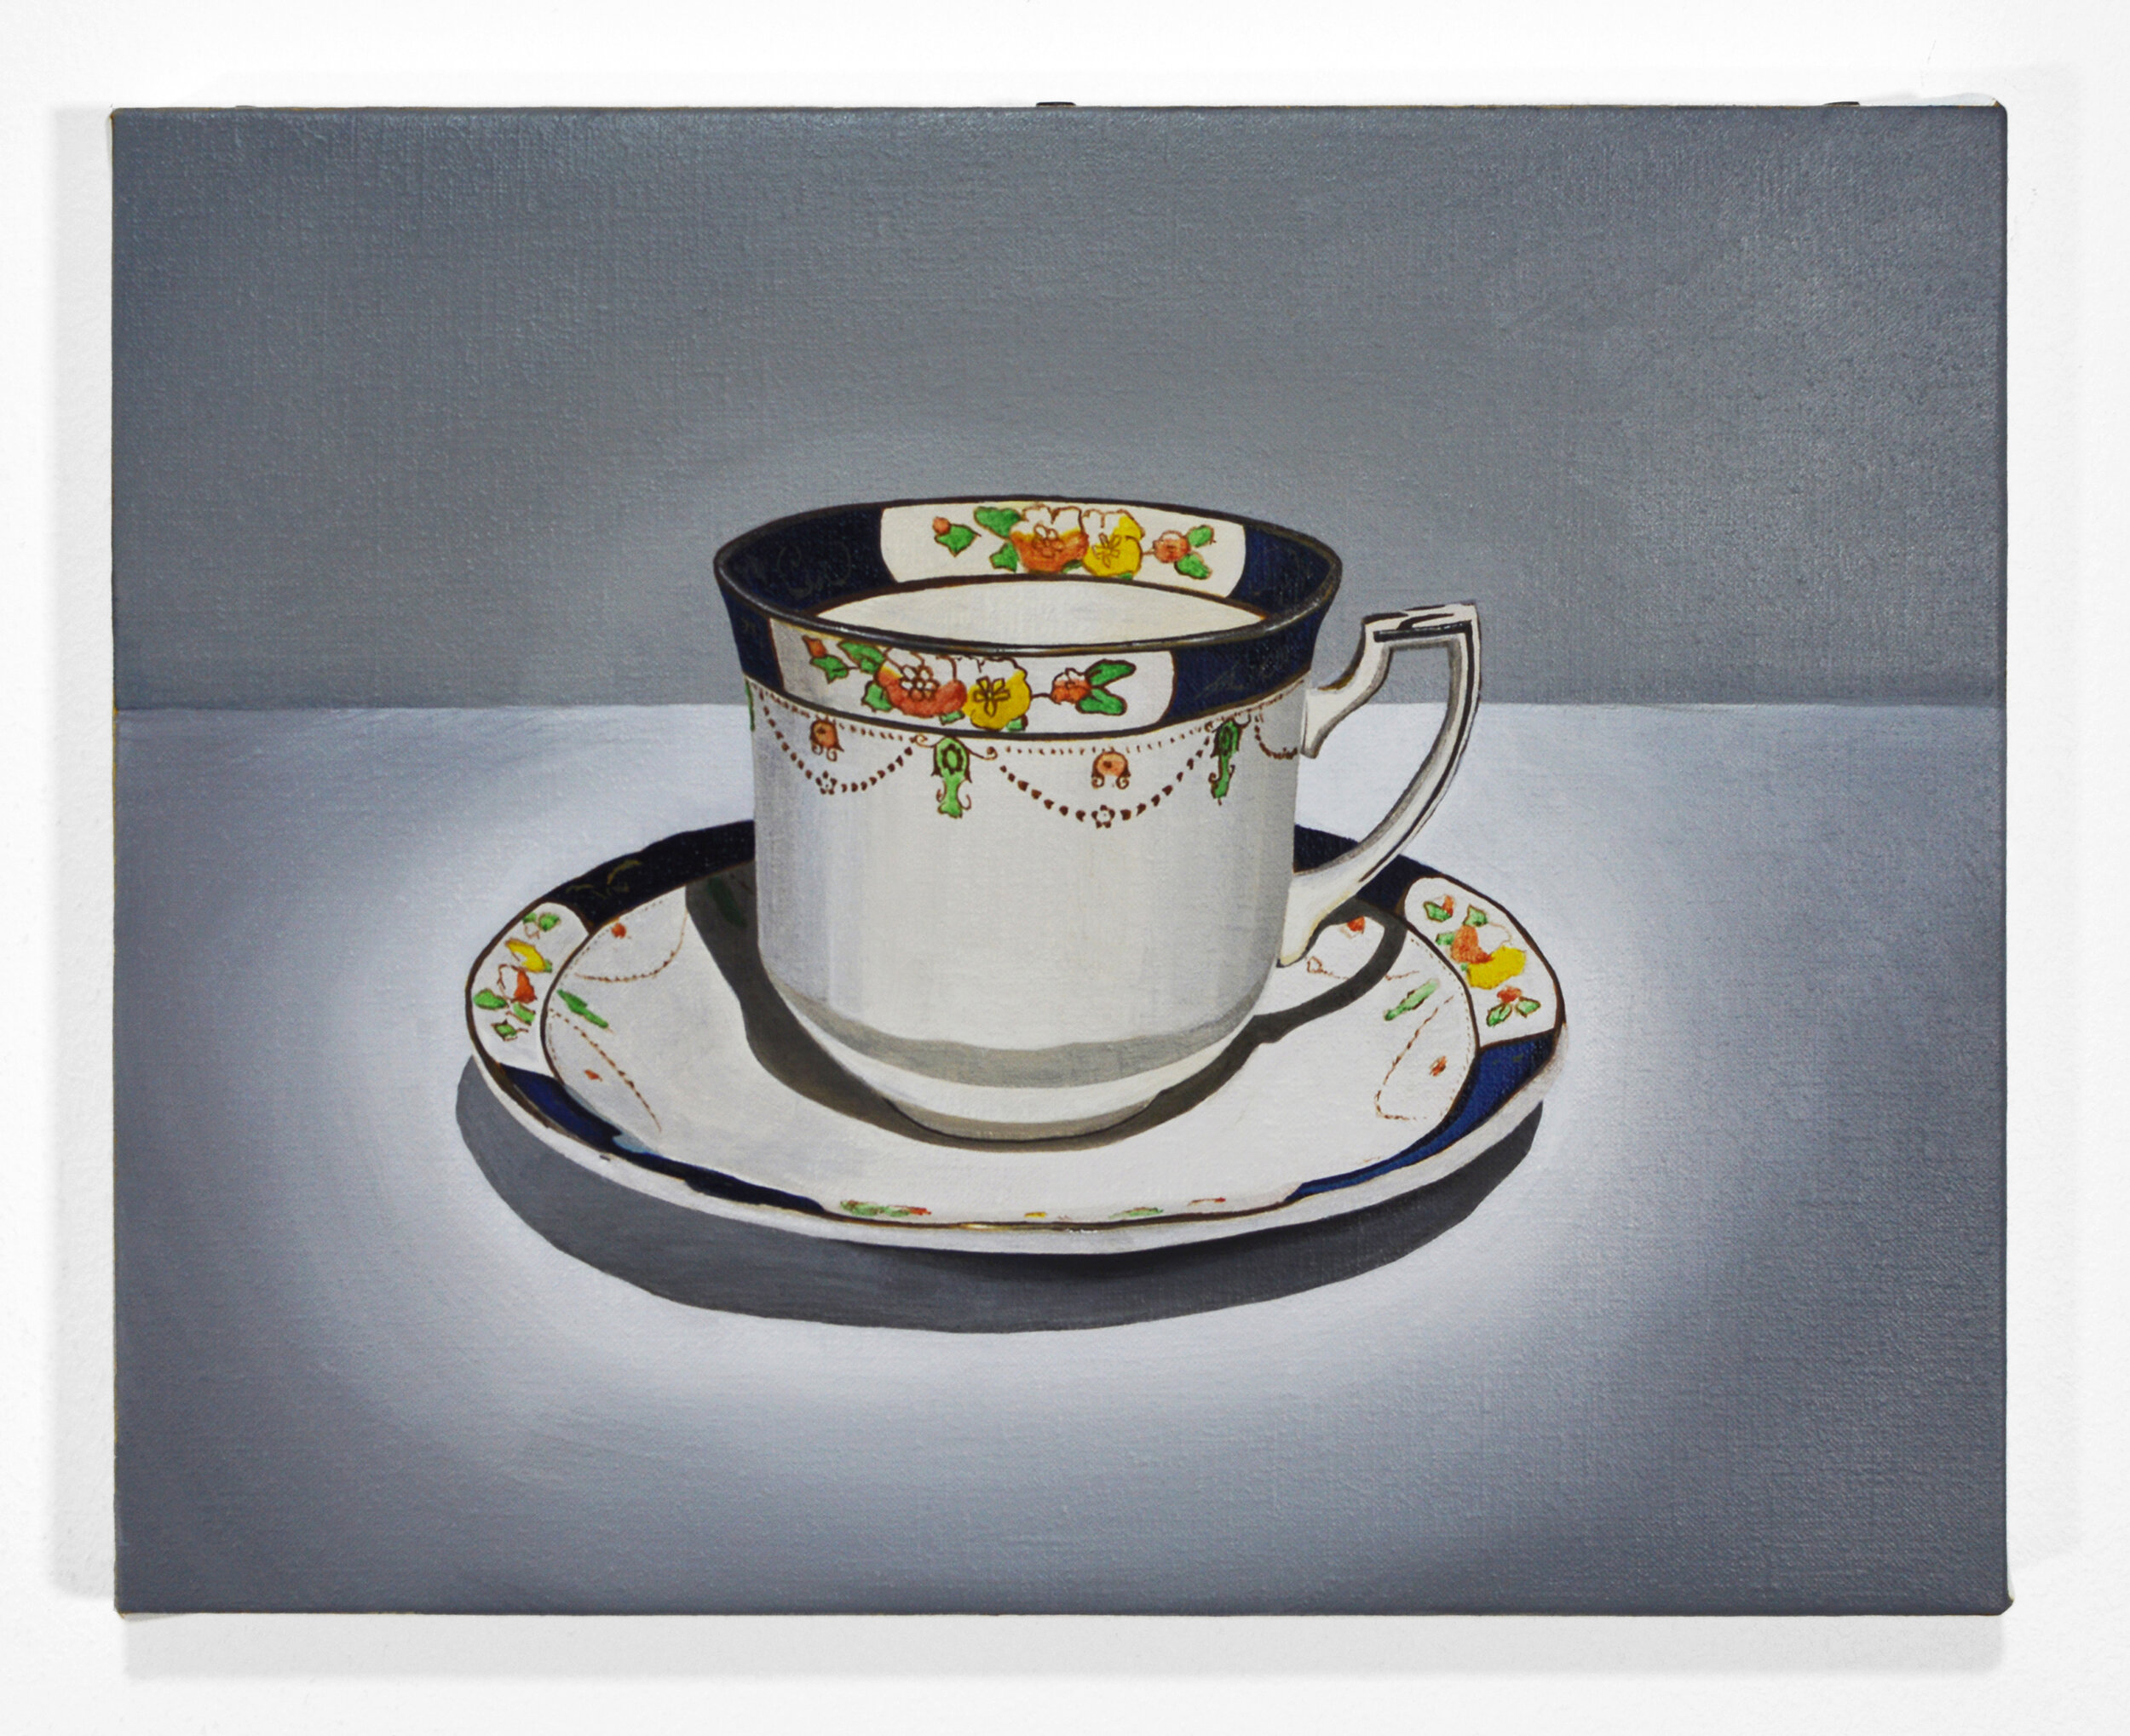  Teacup and saucer in spotlight (2019)   Oil on linen  22 x 29cm  Available 